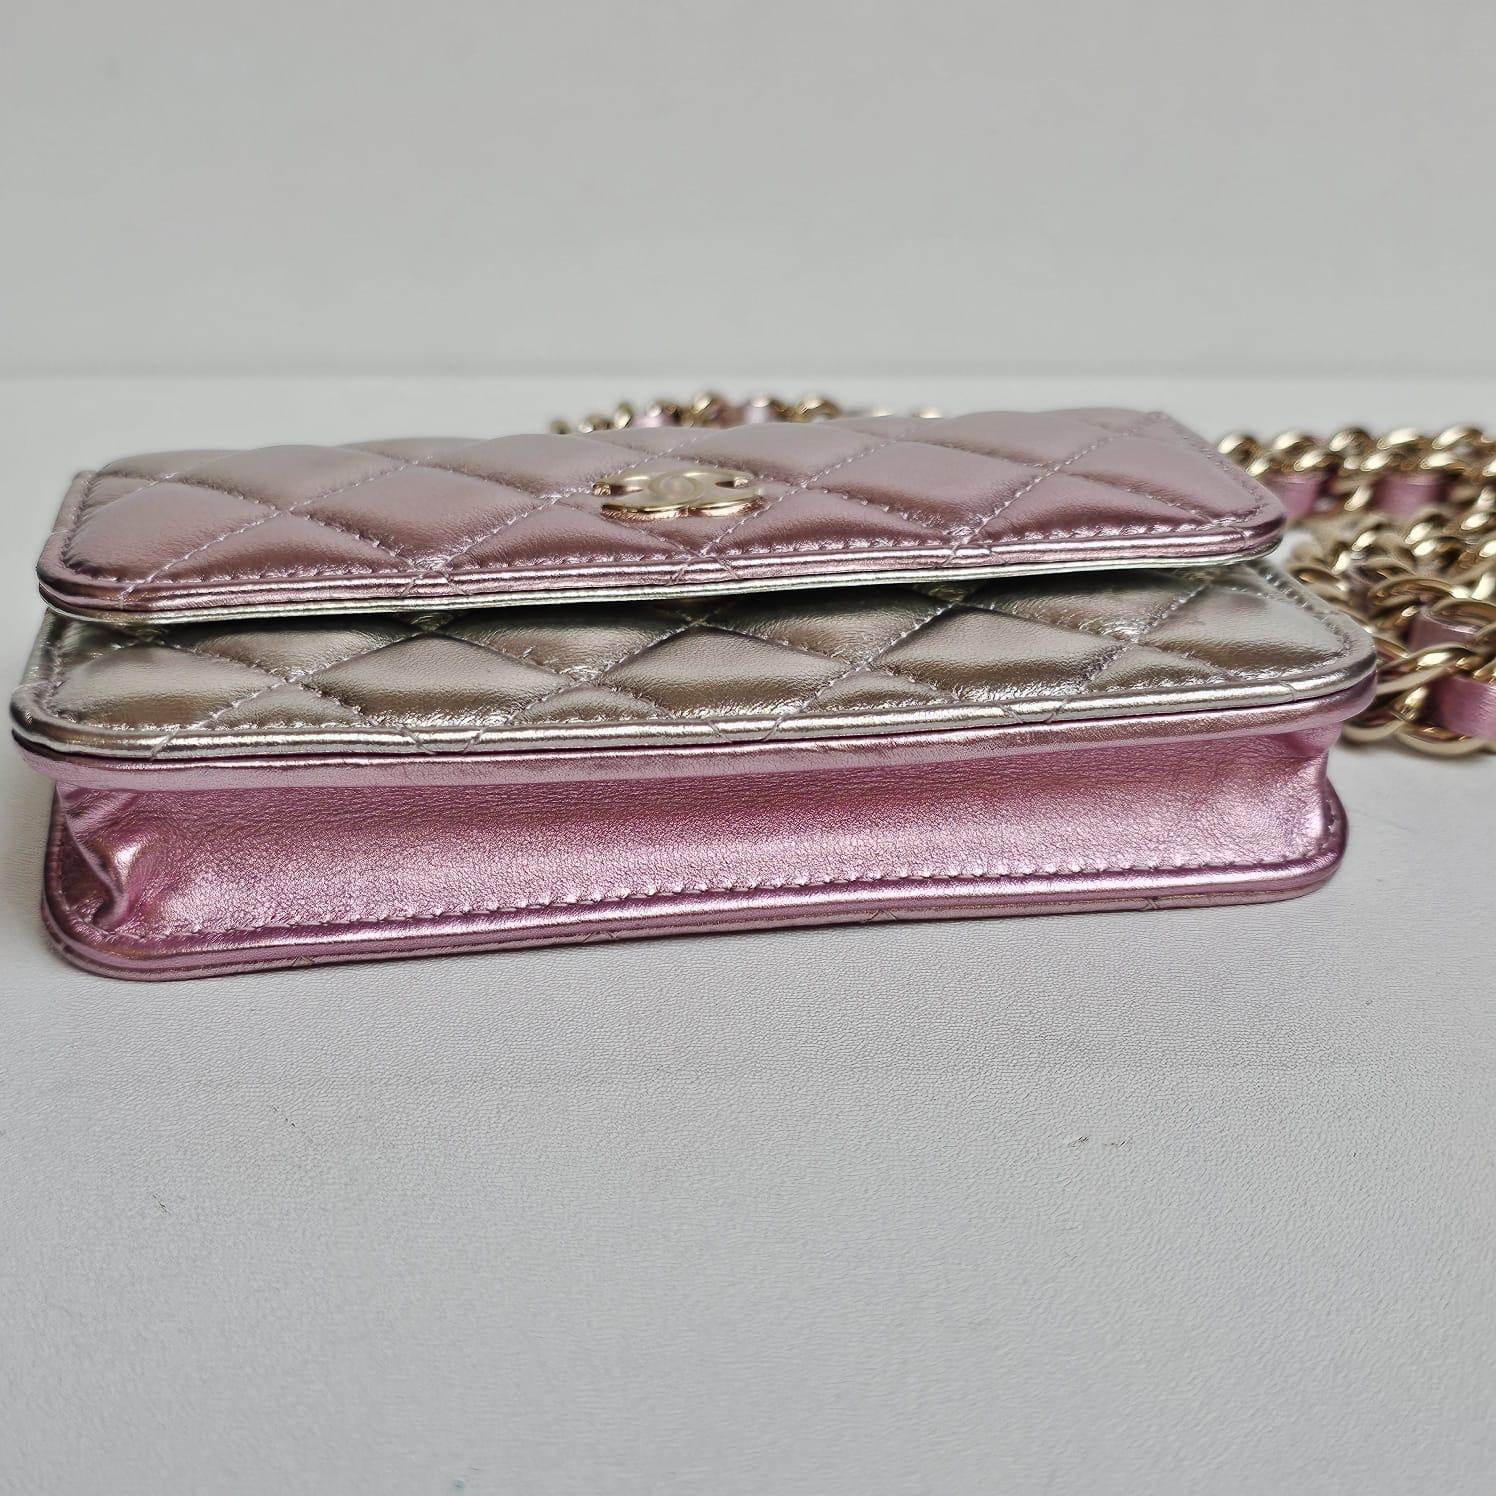 Chanel Pink Silver Metallic Iridescent Wallet on Chain For Sale 7